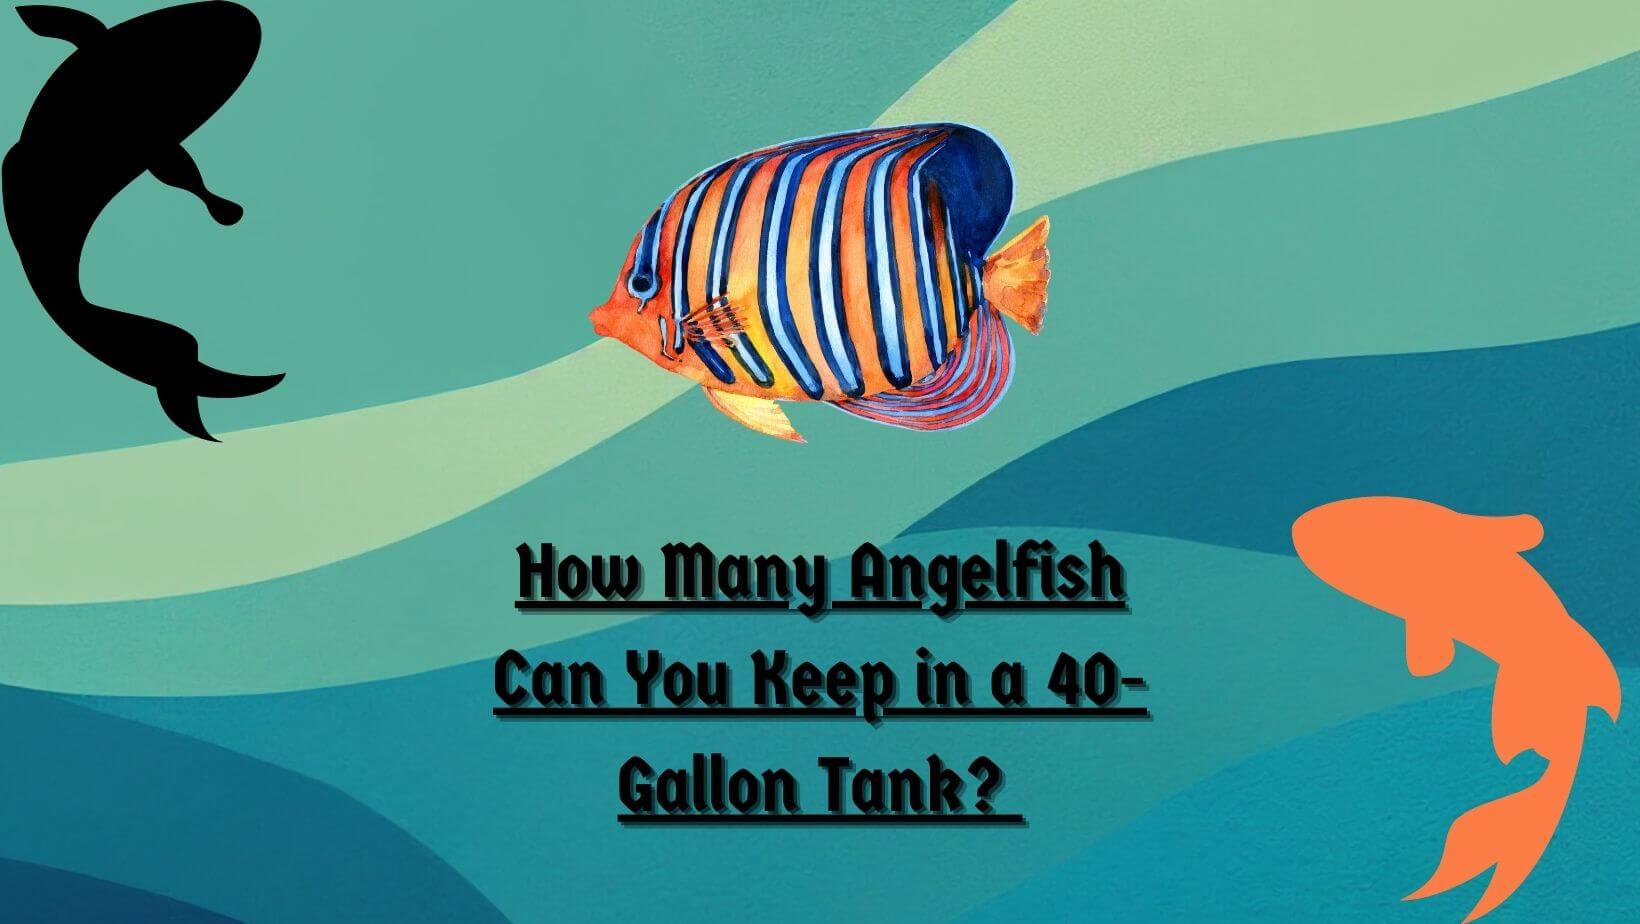 How Many Angelfish Can You Keep in a 40-Gallon Tank